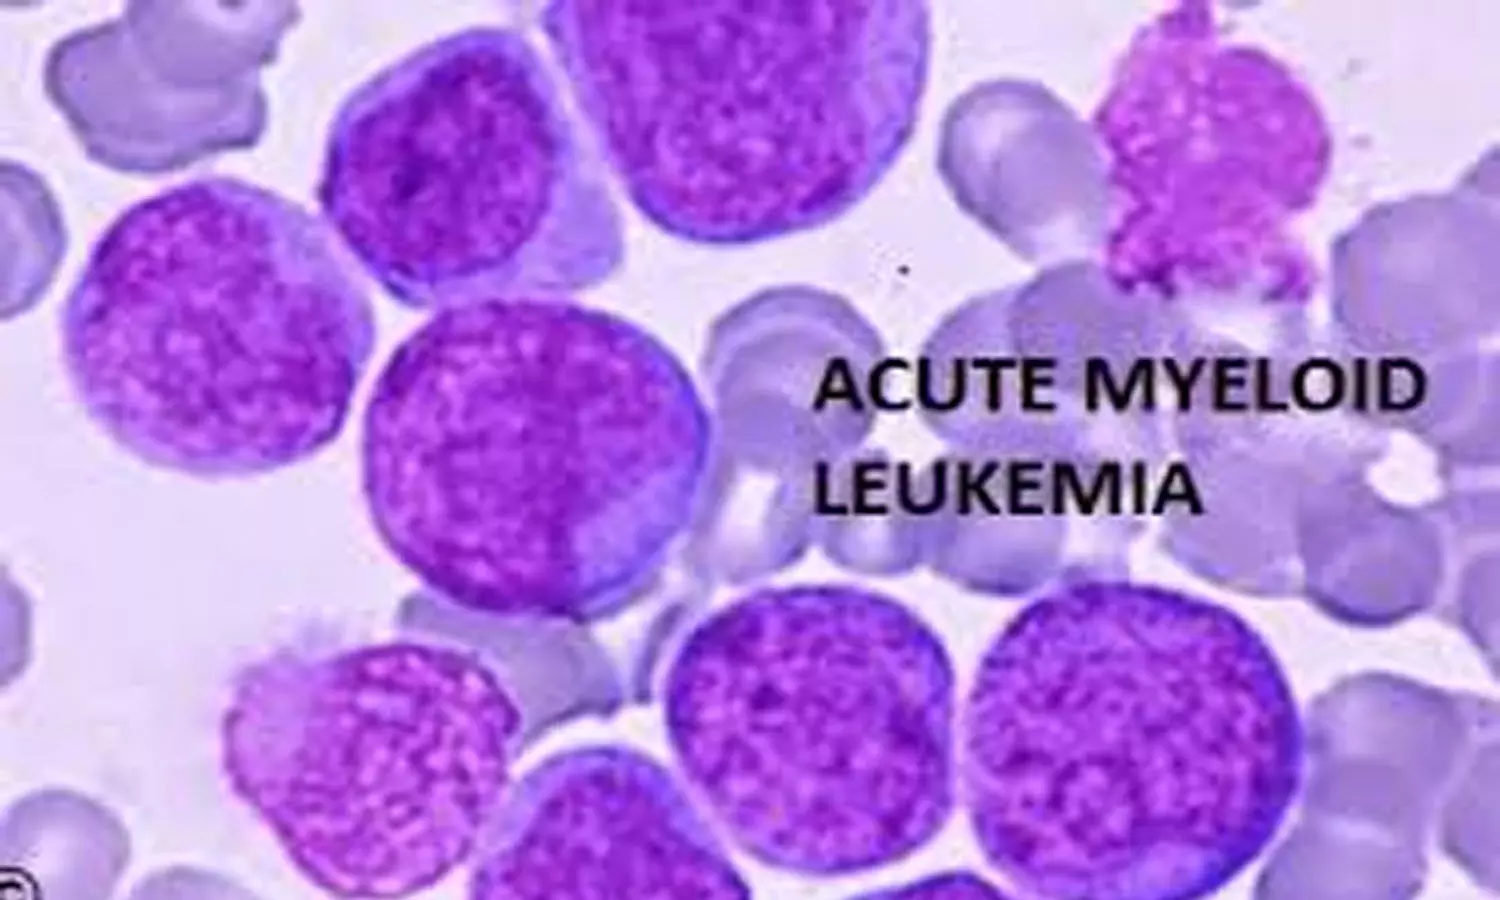 Investigational drug Shows Survival Benefit For Some Leukemia Patients in Phase 3 study